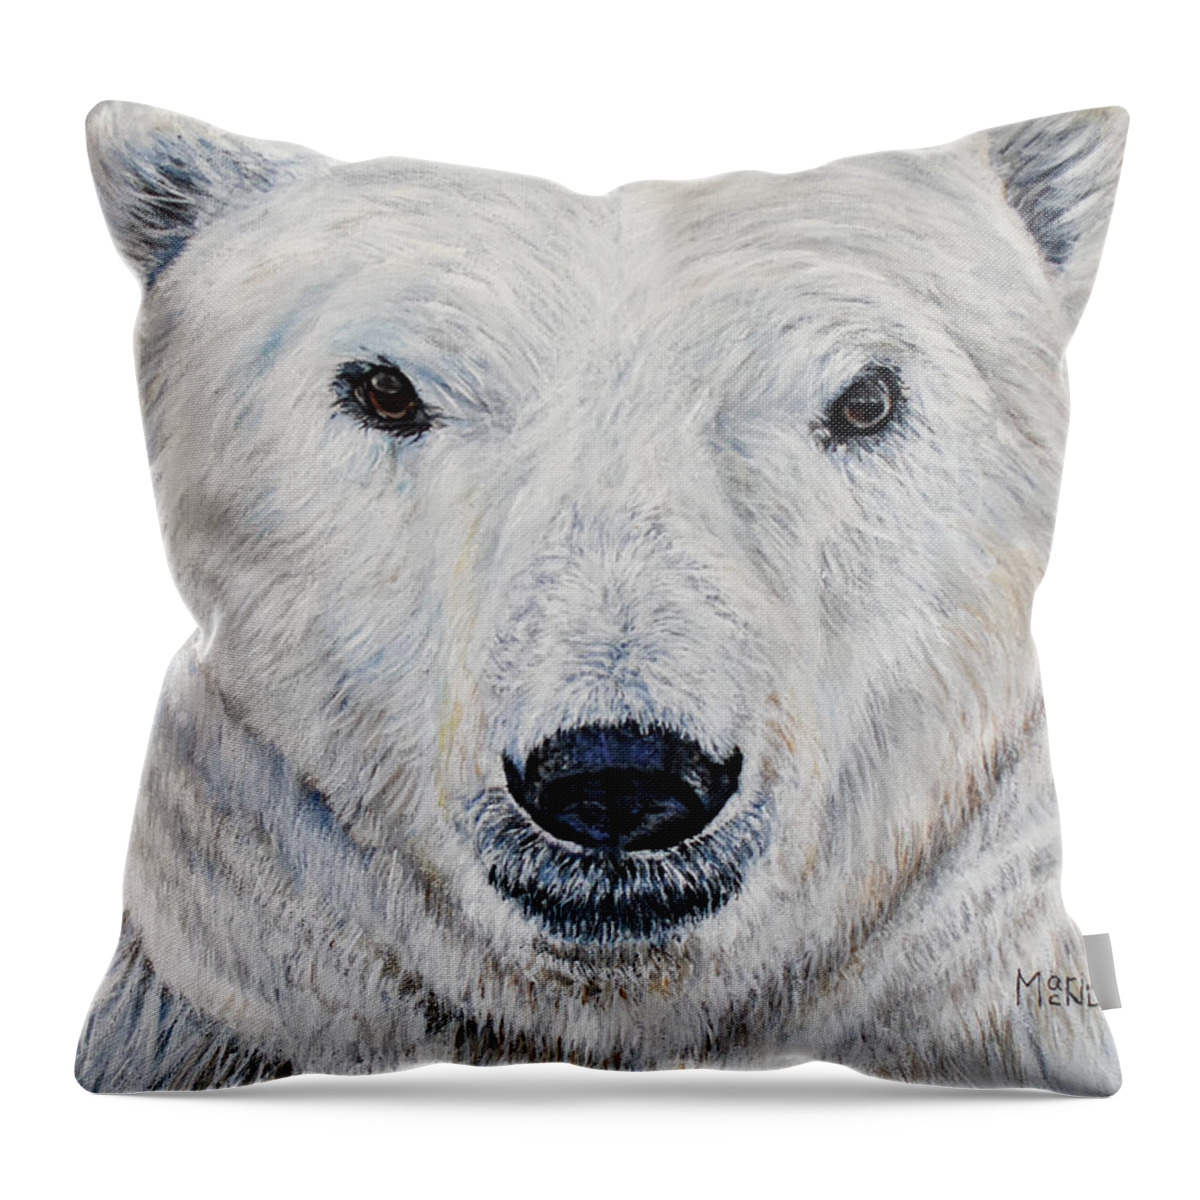 Hypercarnivores Throw Pillow featuring the painting Polar Bear - Churchill by Marilyn McNish